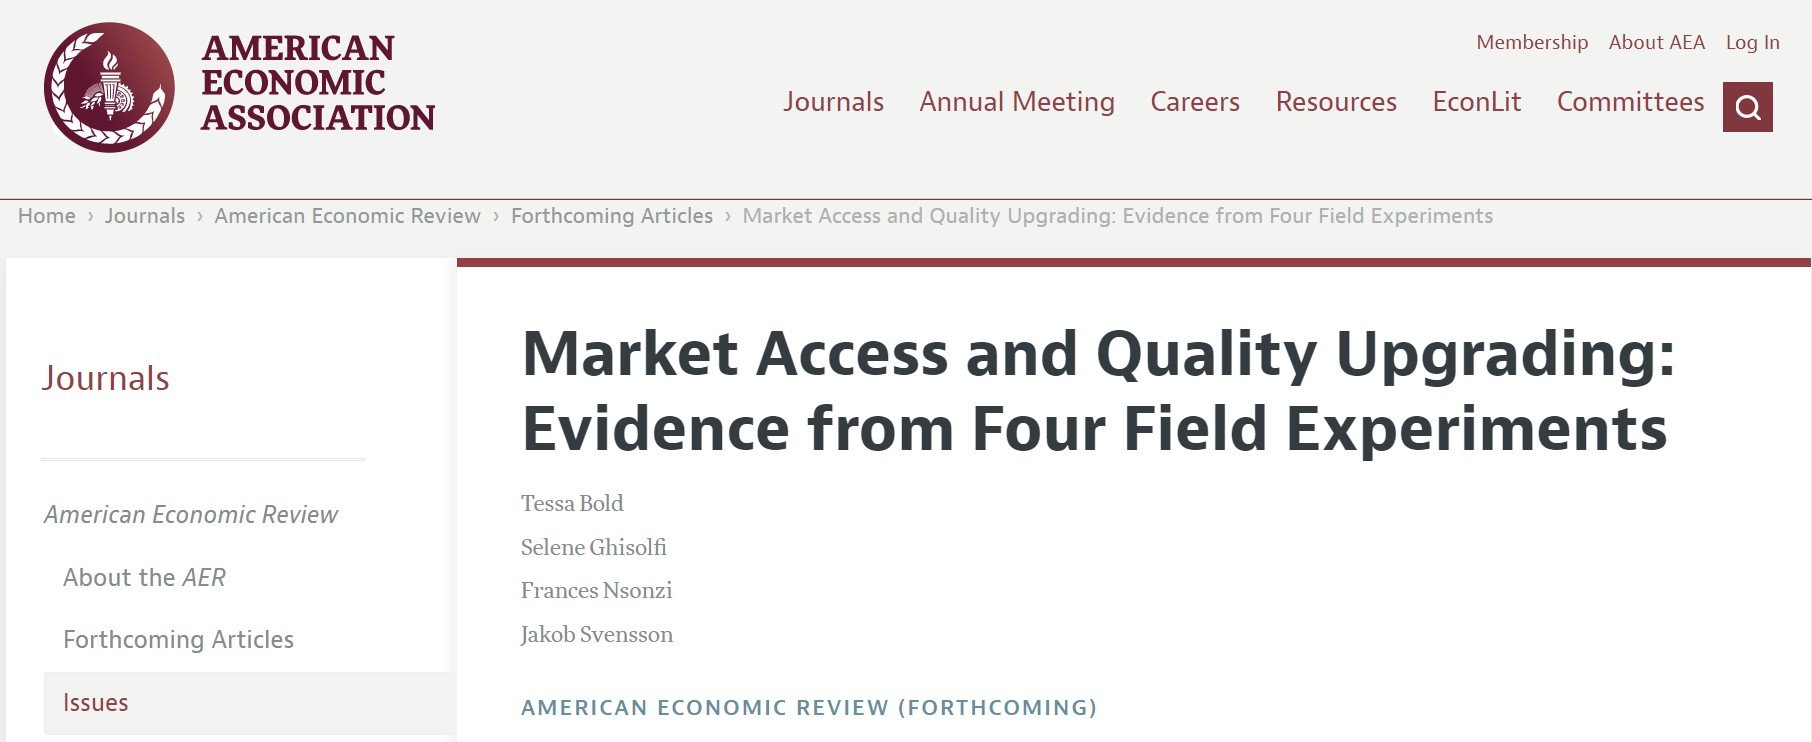 Market Access and Quality Upgrading forthcoming AER